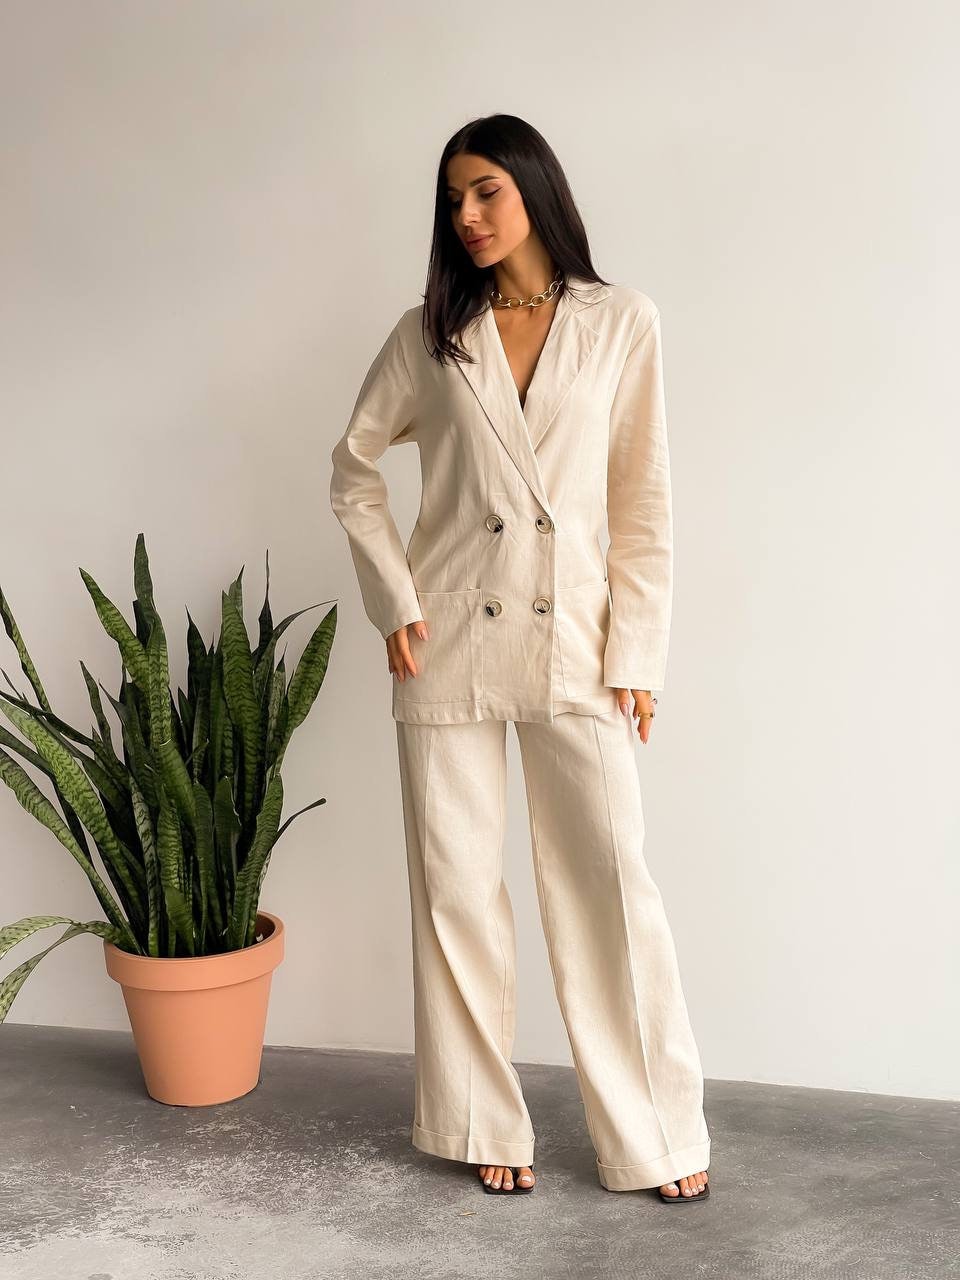 Pant Suits for Women Wedding Guest -  Canada